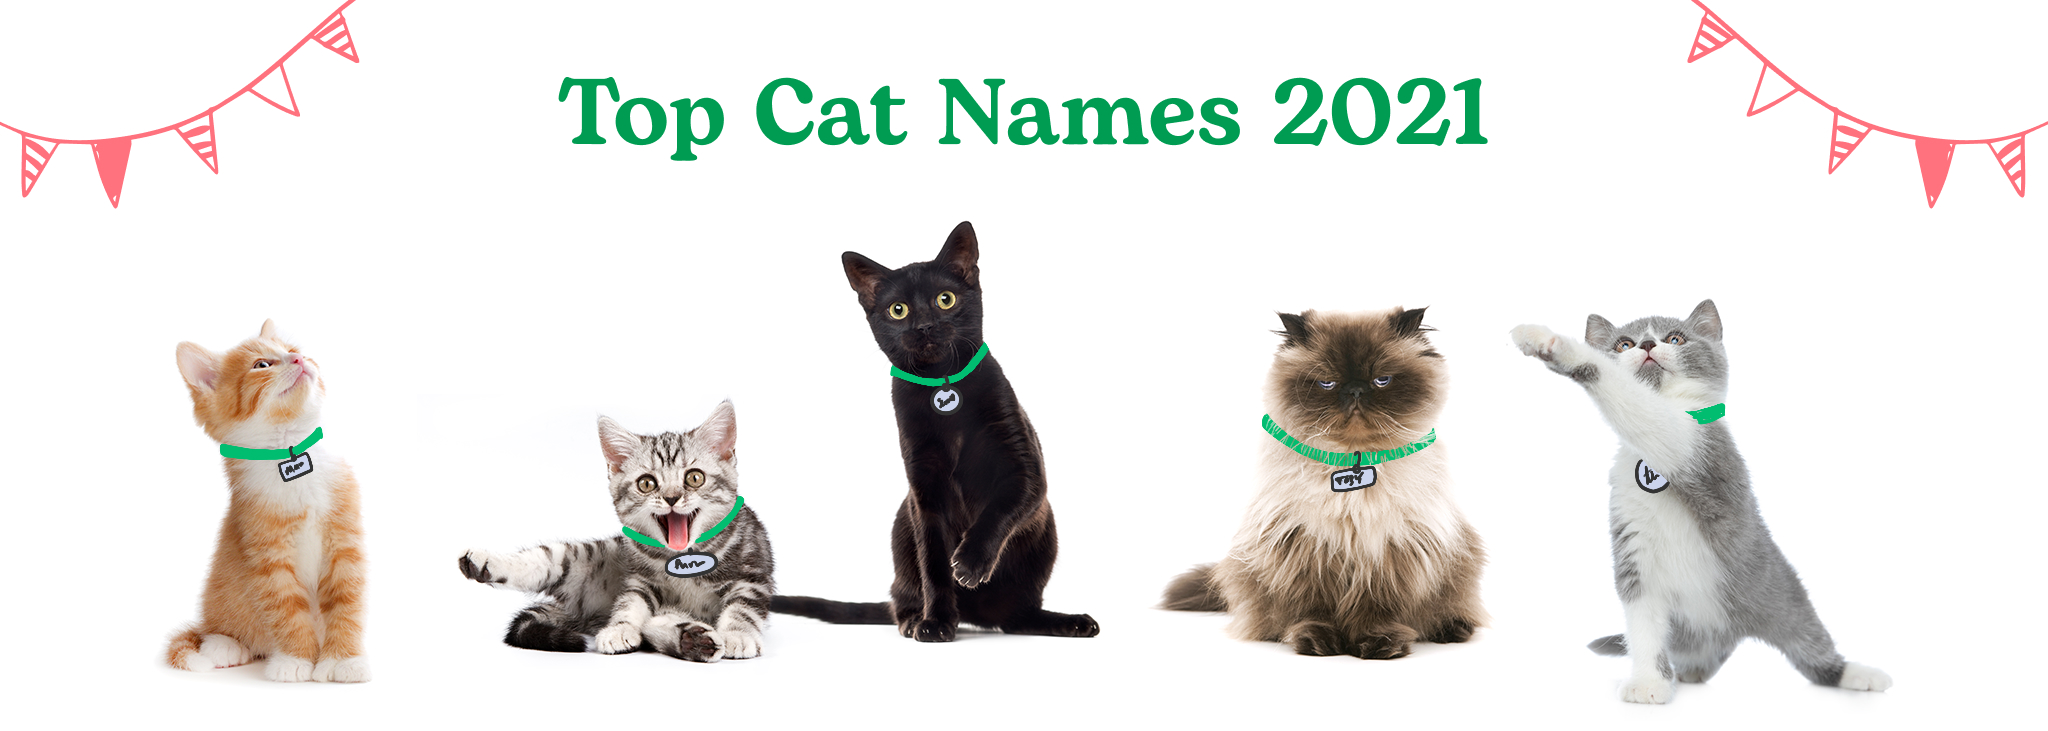 A variety of cats playing on a white background with "Top Cat Names 2021" in Rover green text.